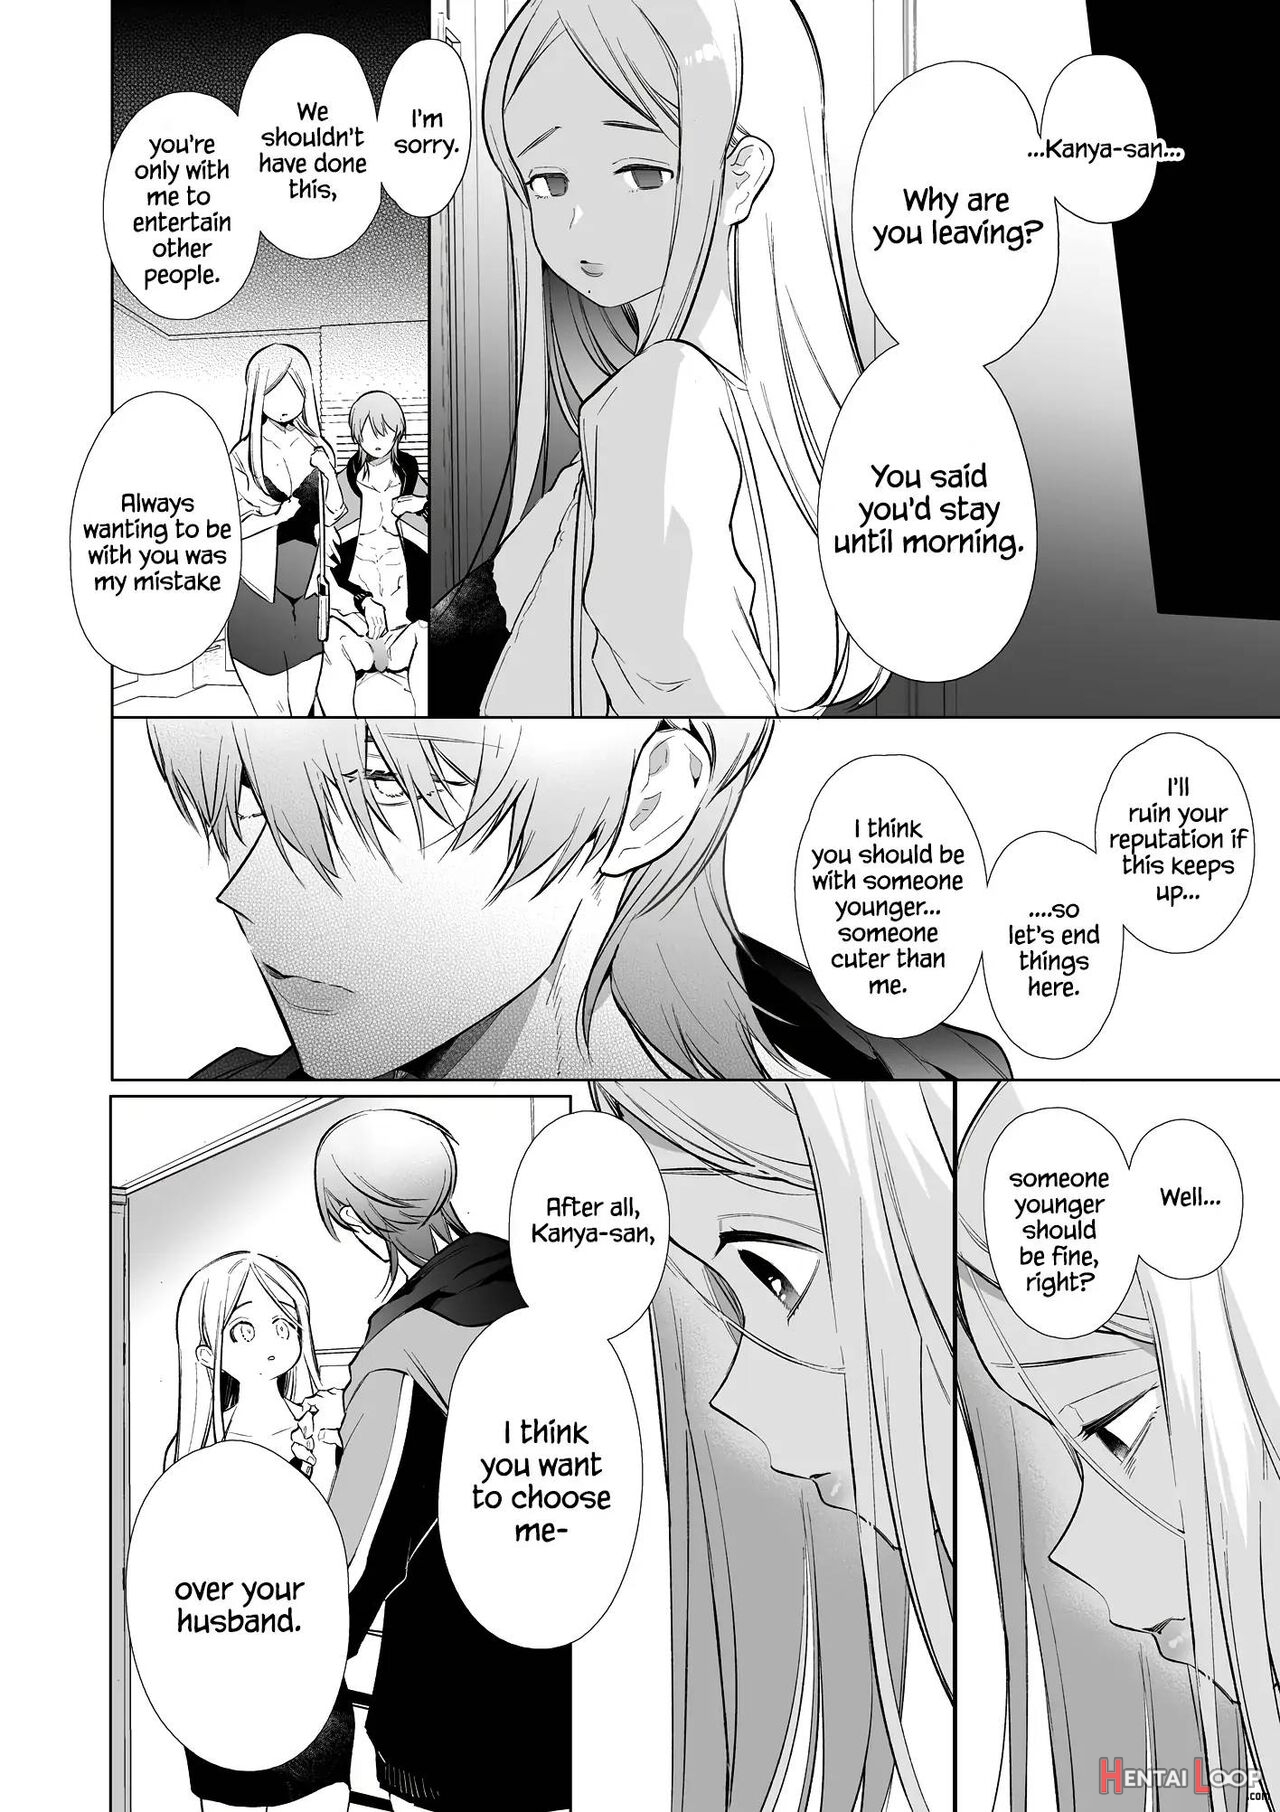 Kana-san Ntr ~ Degradation Of A Housewife By A Guy In An Alter Account ~ page 47